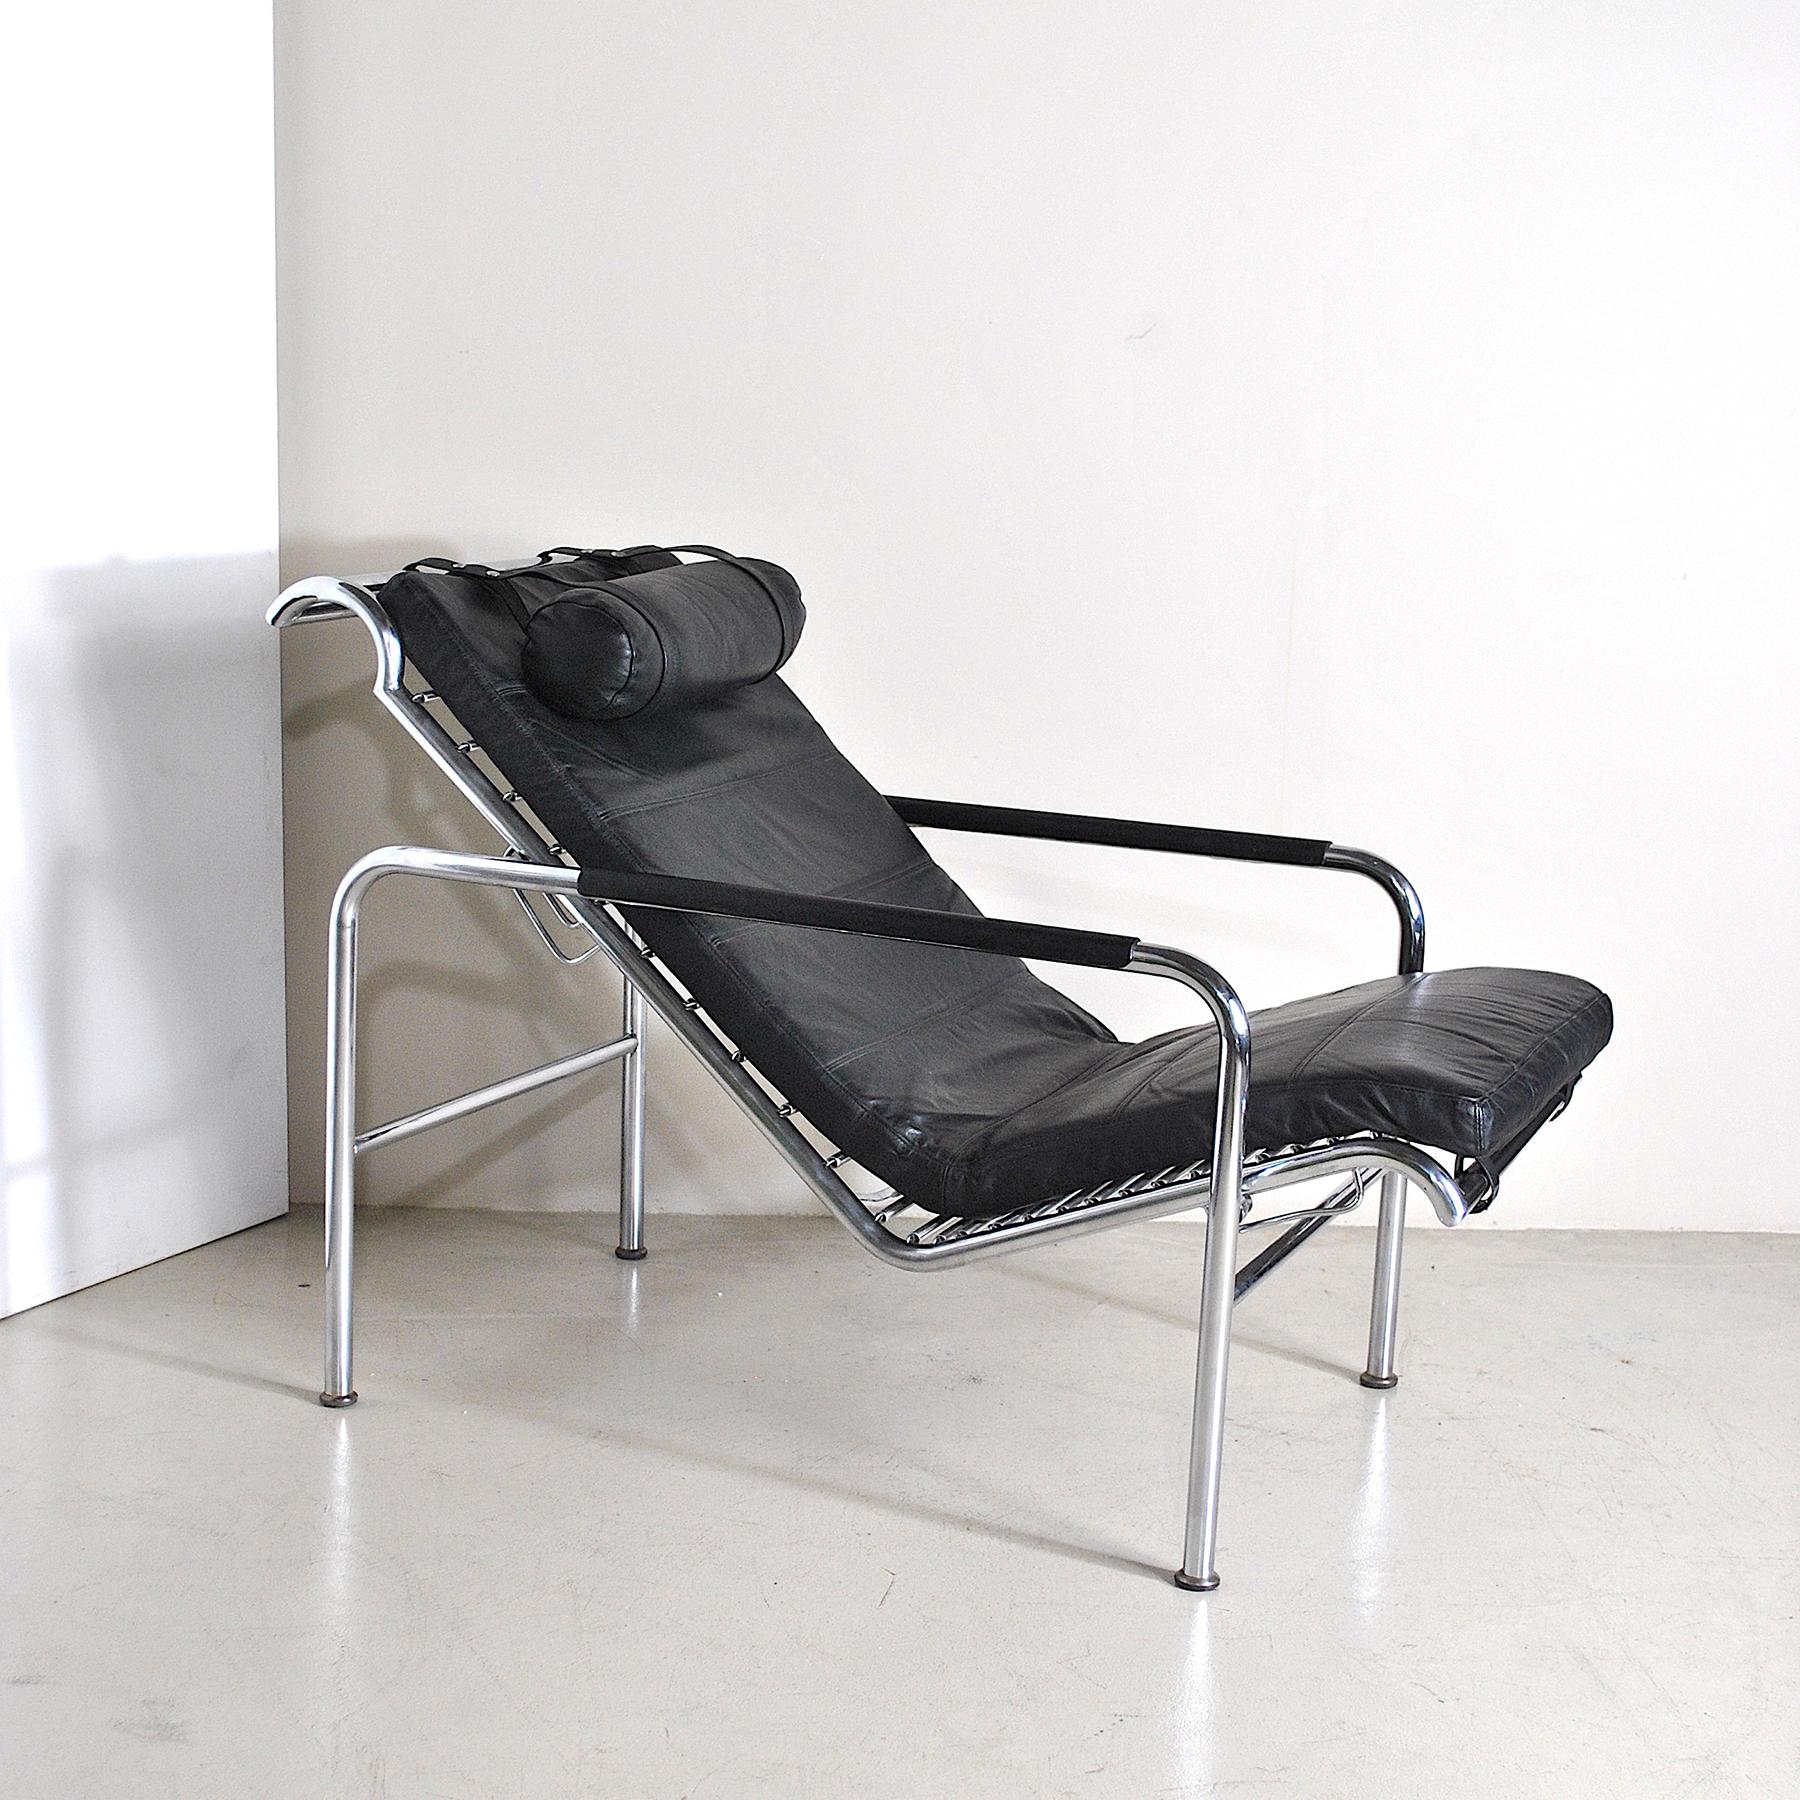 Genni model chaise longue designed by Gabriele Mucchi for Zanotta, early 80's production.